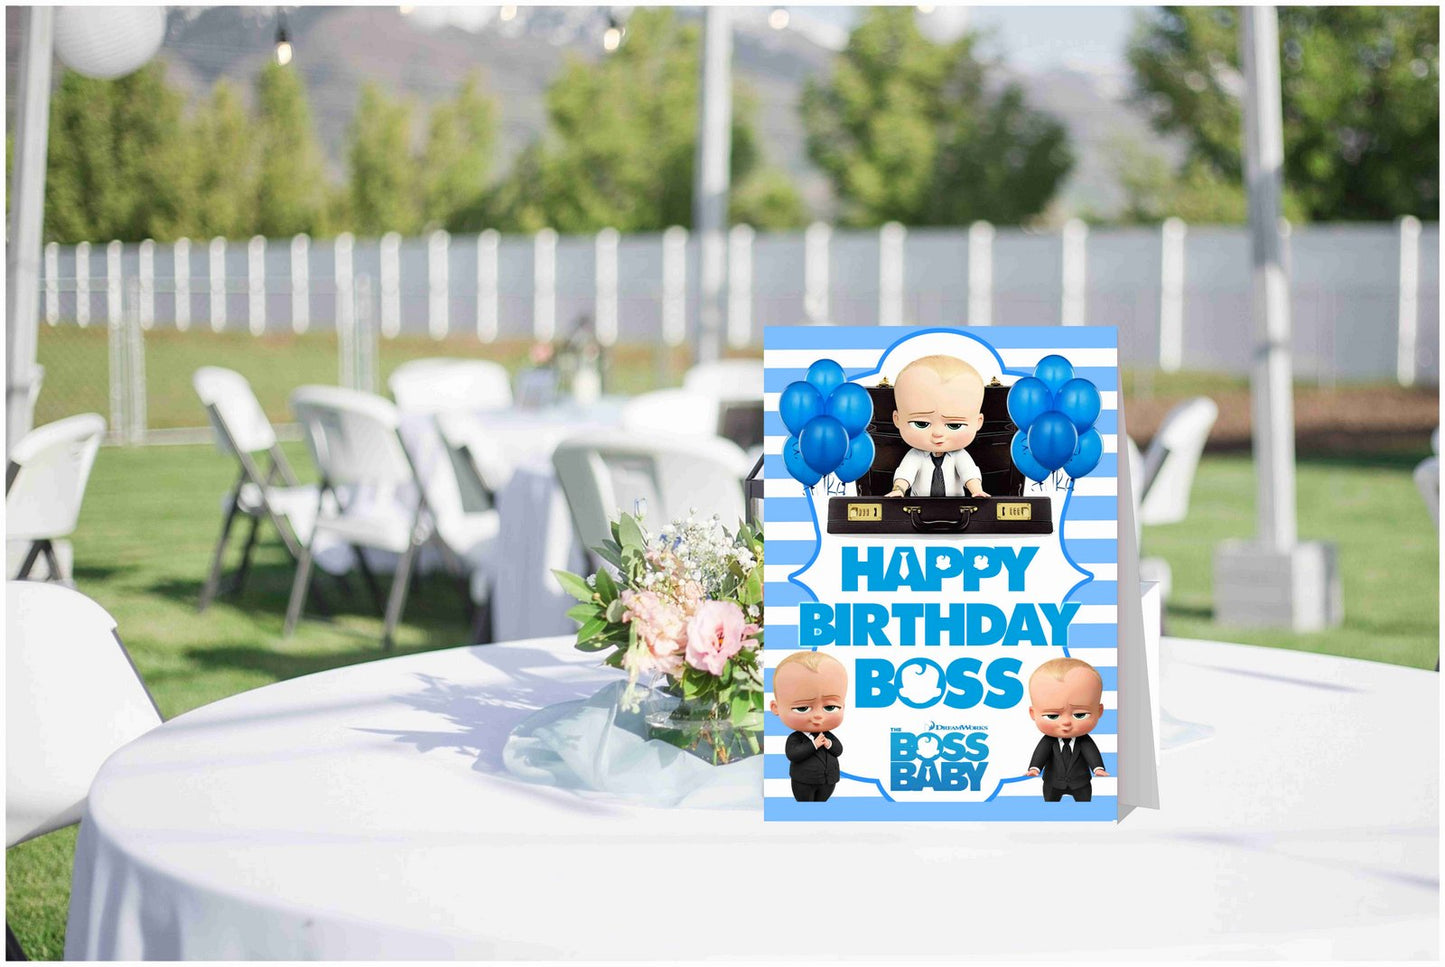 Boss Baby Theme Cake Table and Guest Table Birthday Decoration Centerpiece Pack of 2